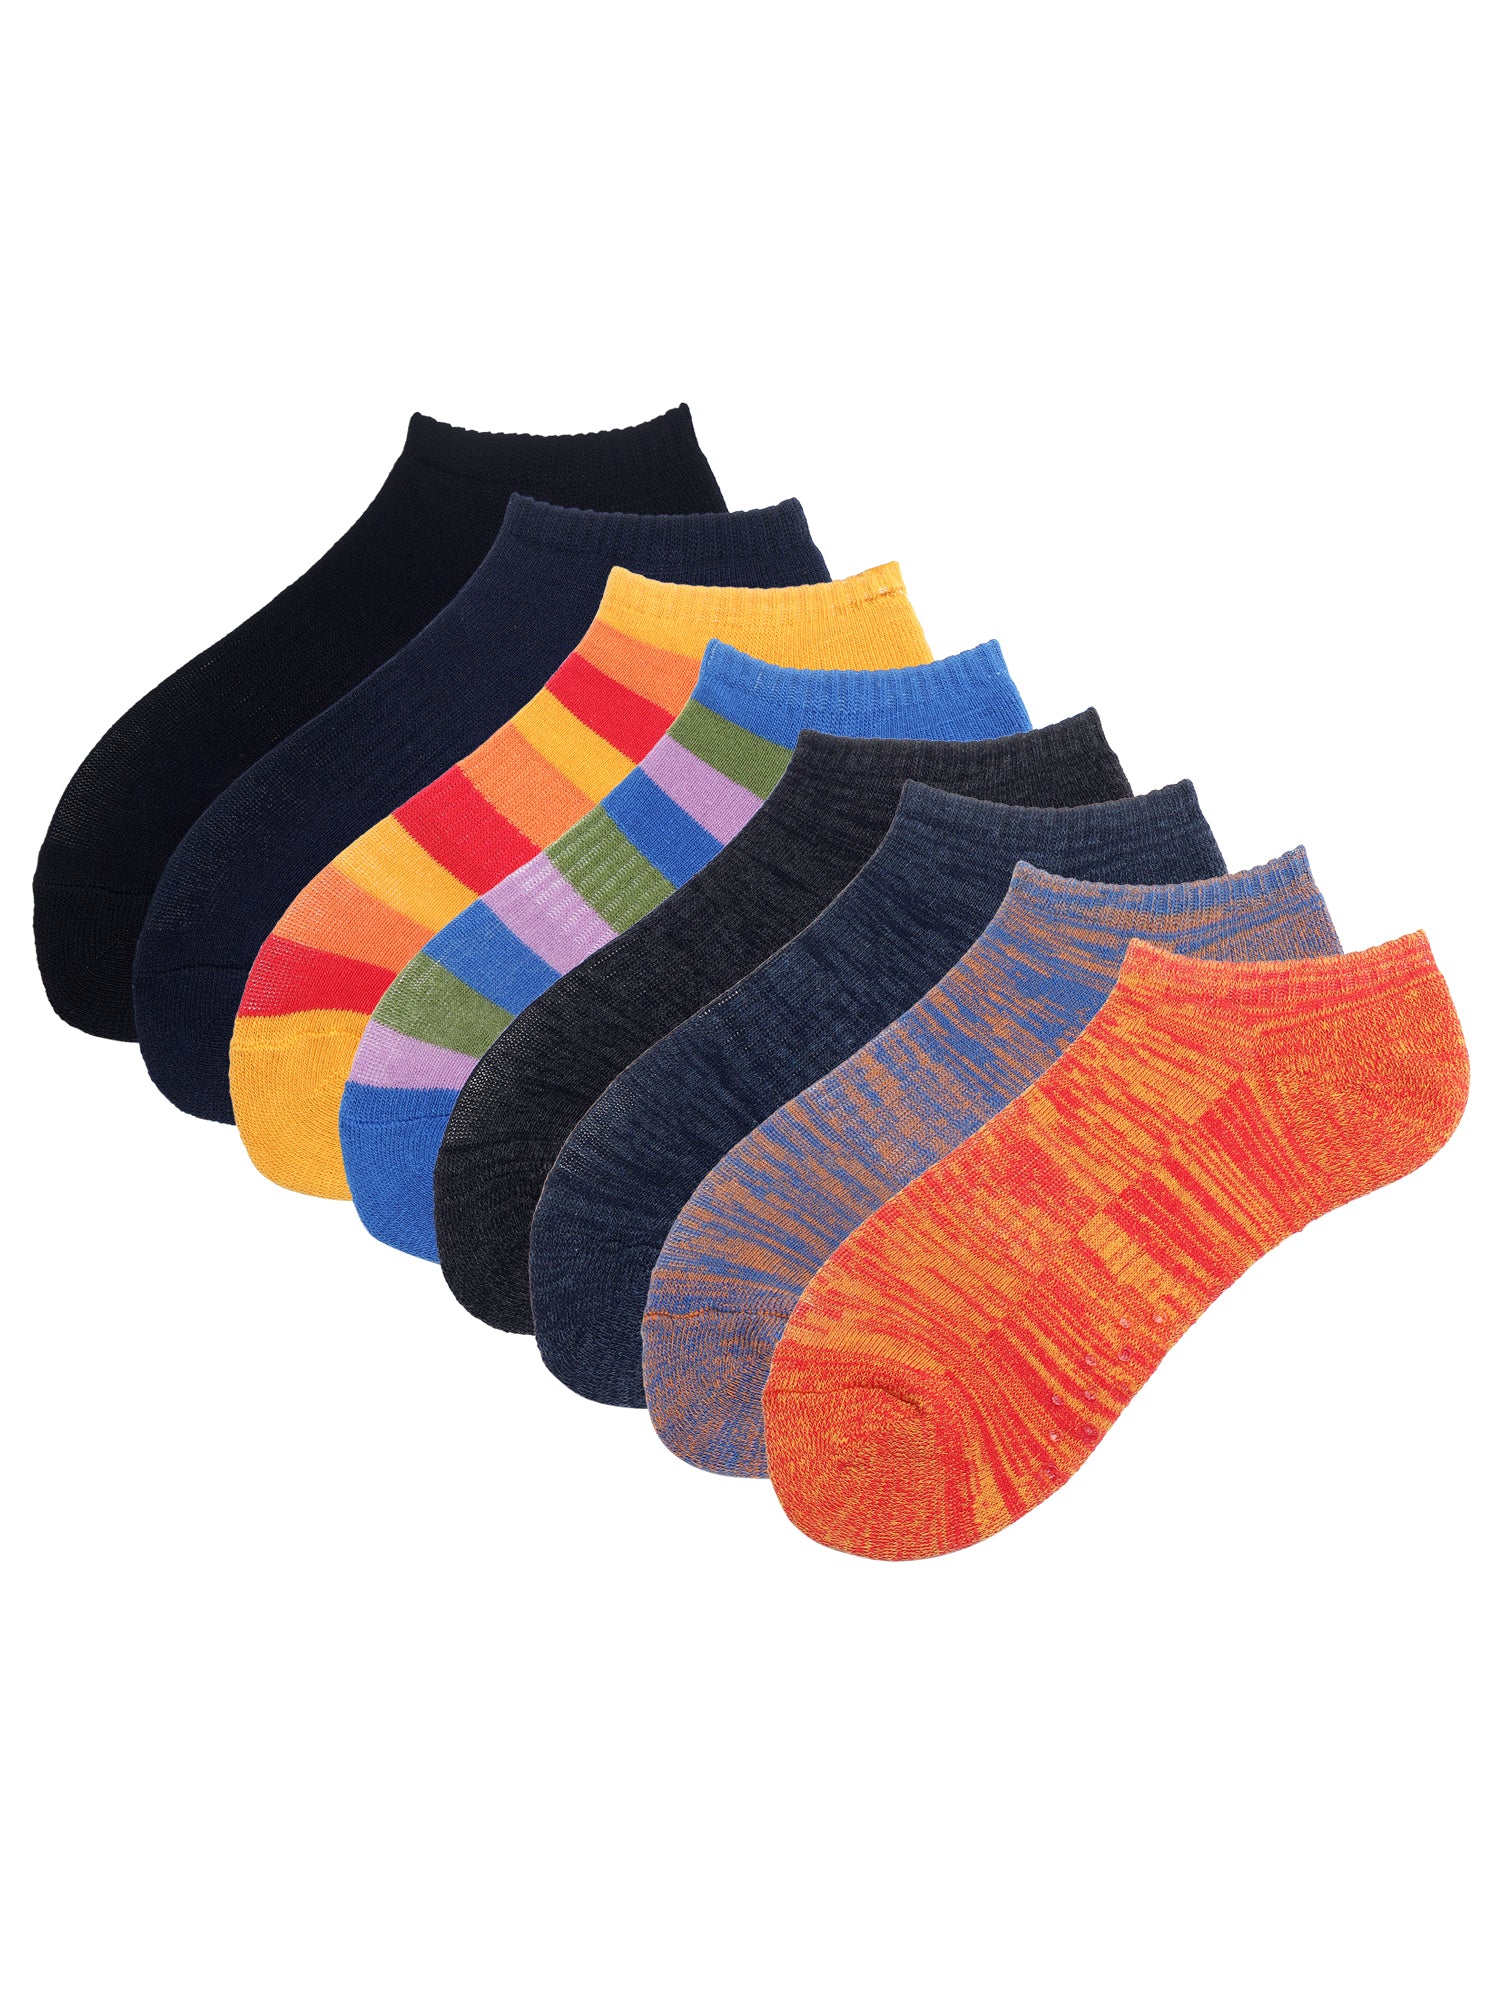 Grippers | The Ultimate Box Of 8 Pairs | Low Cut Lounging Socks